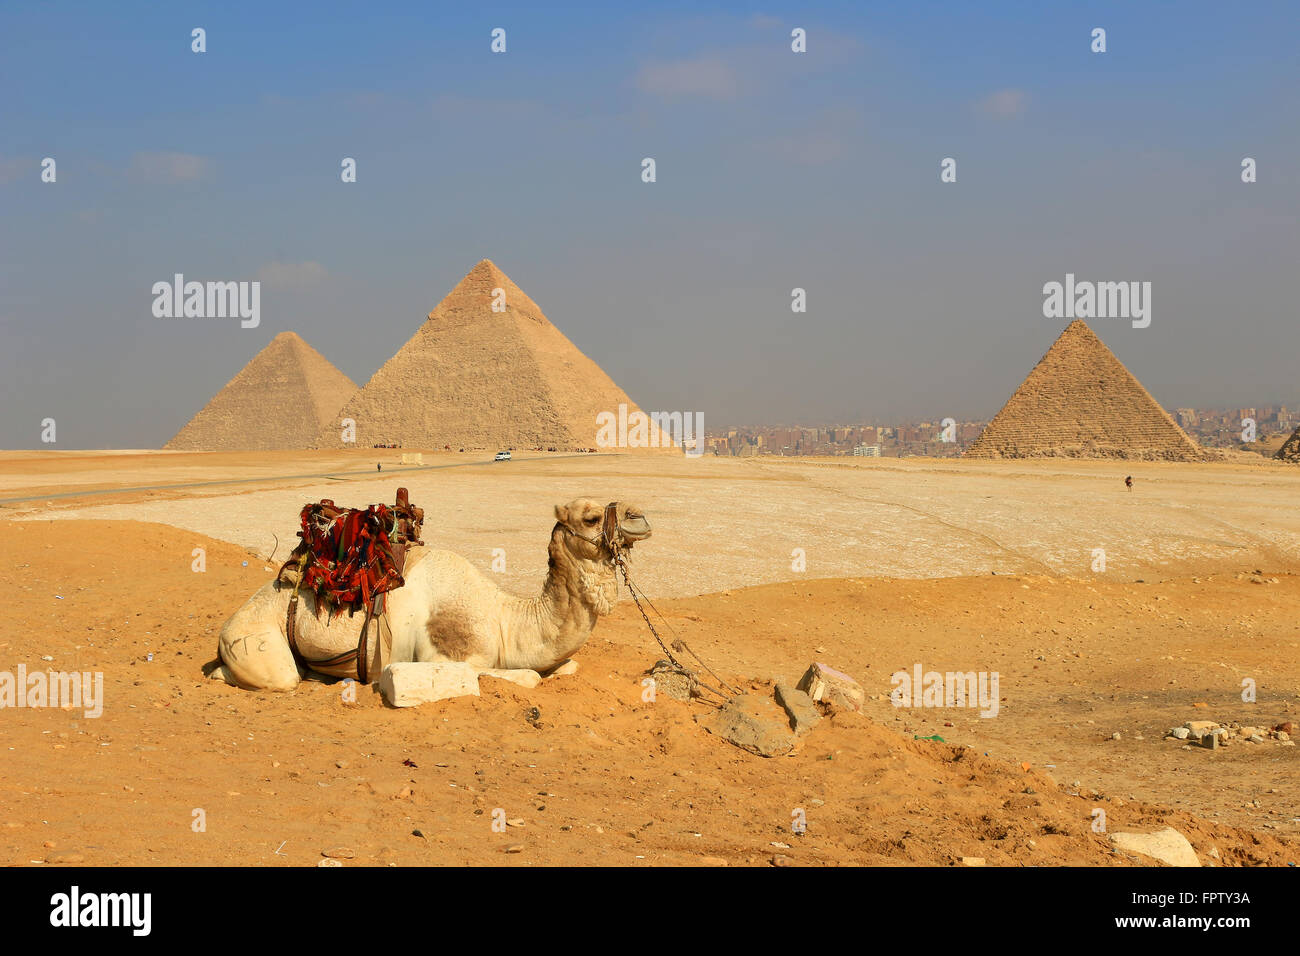 Camel relaxing at The Pyramids of Giza, man-made structures from Ancient Egypt in the golden sands of the desert with polluted C Stock Photo